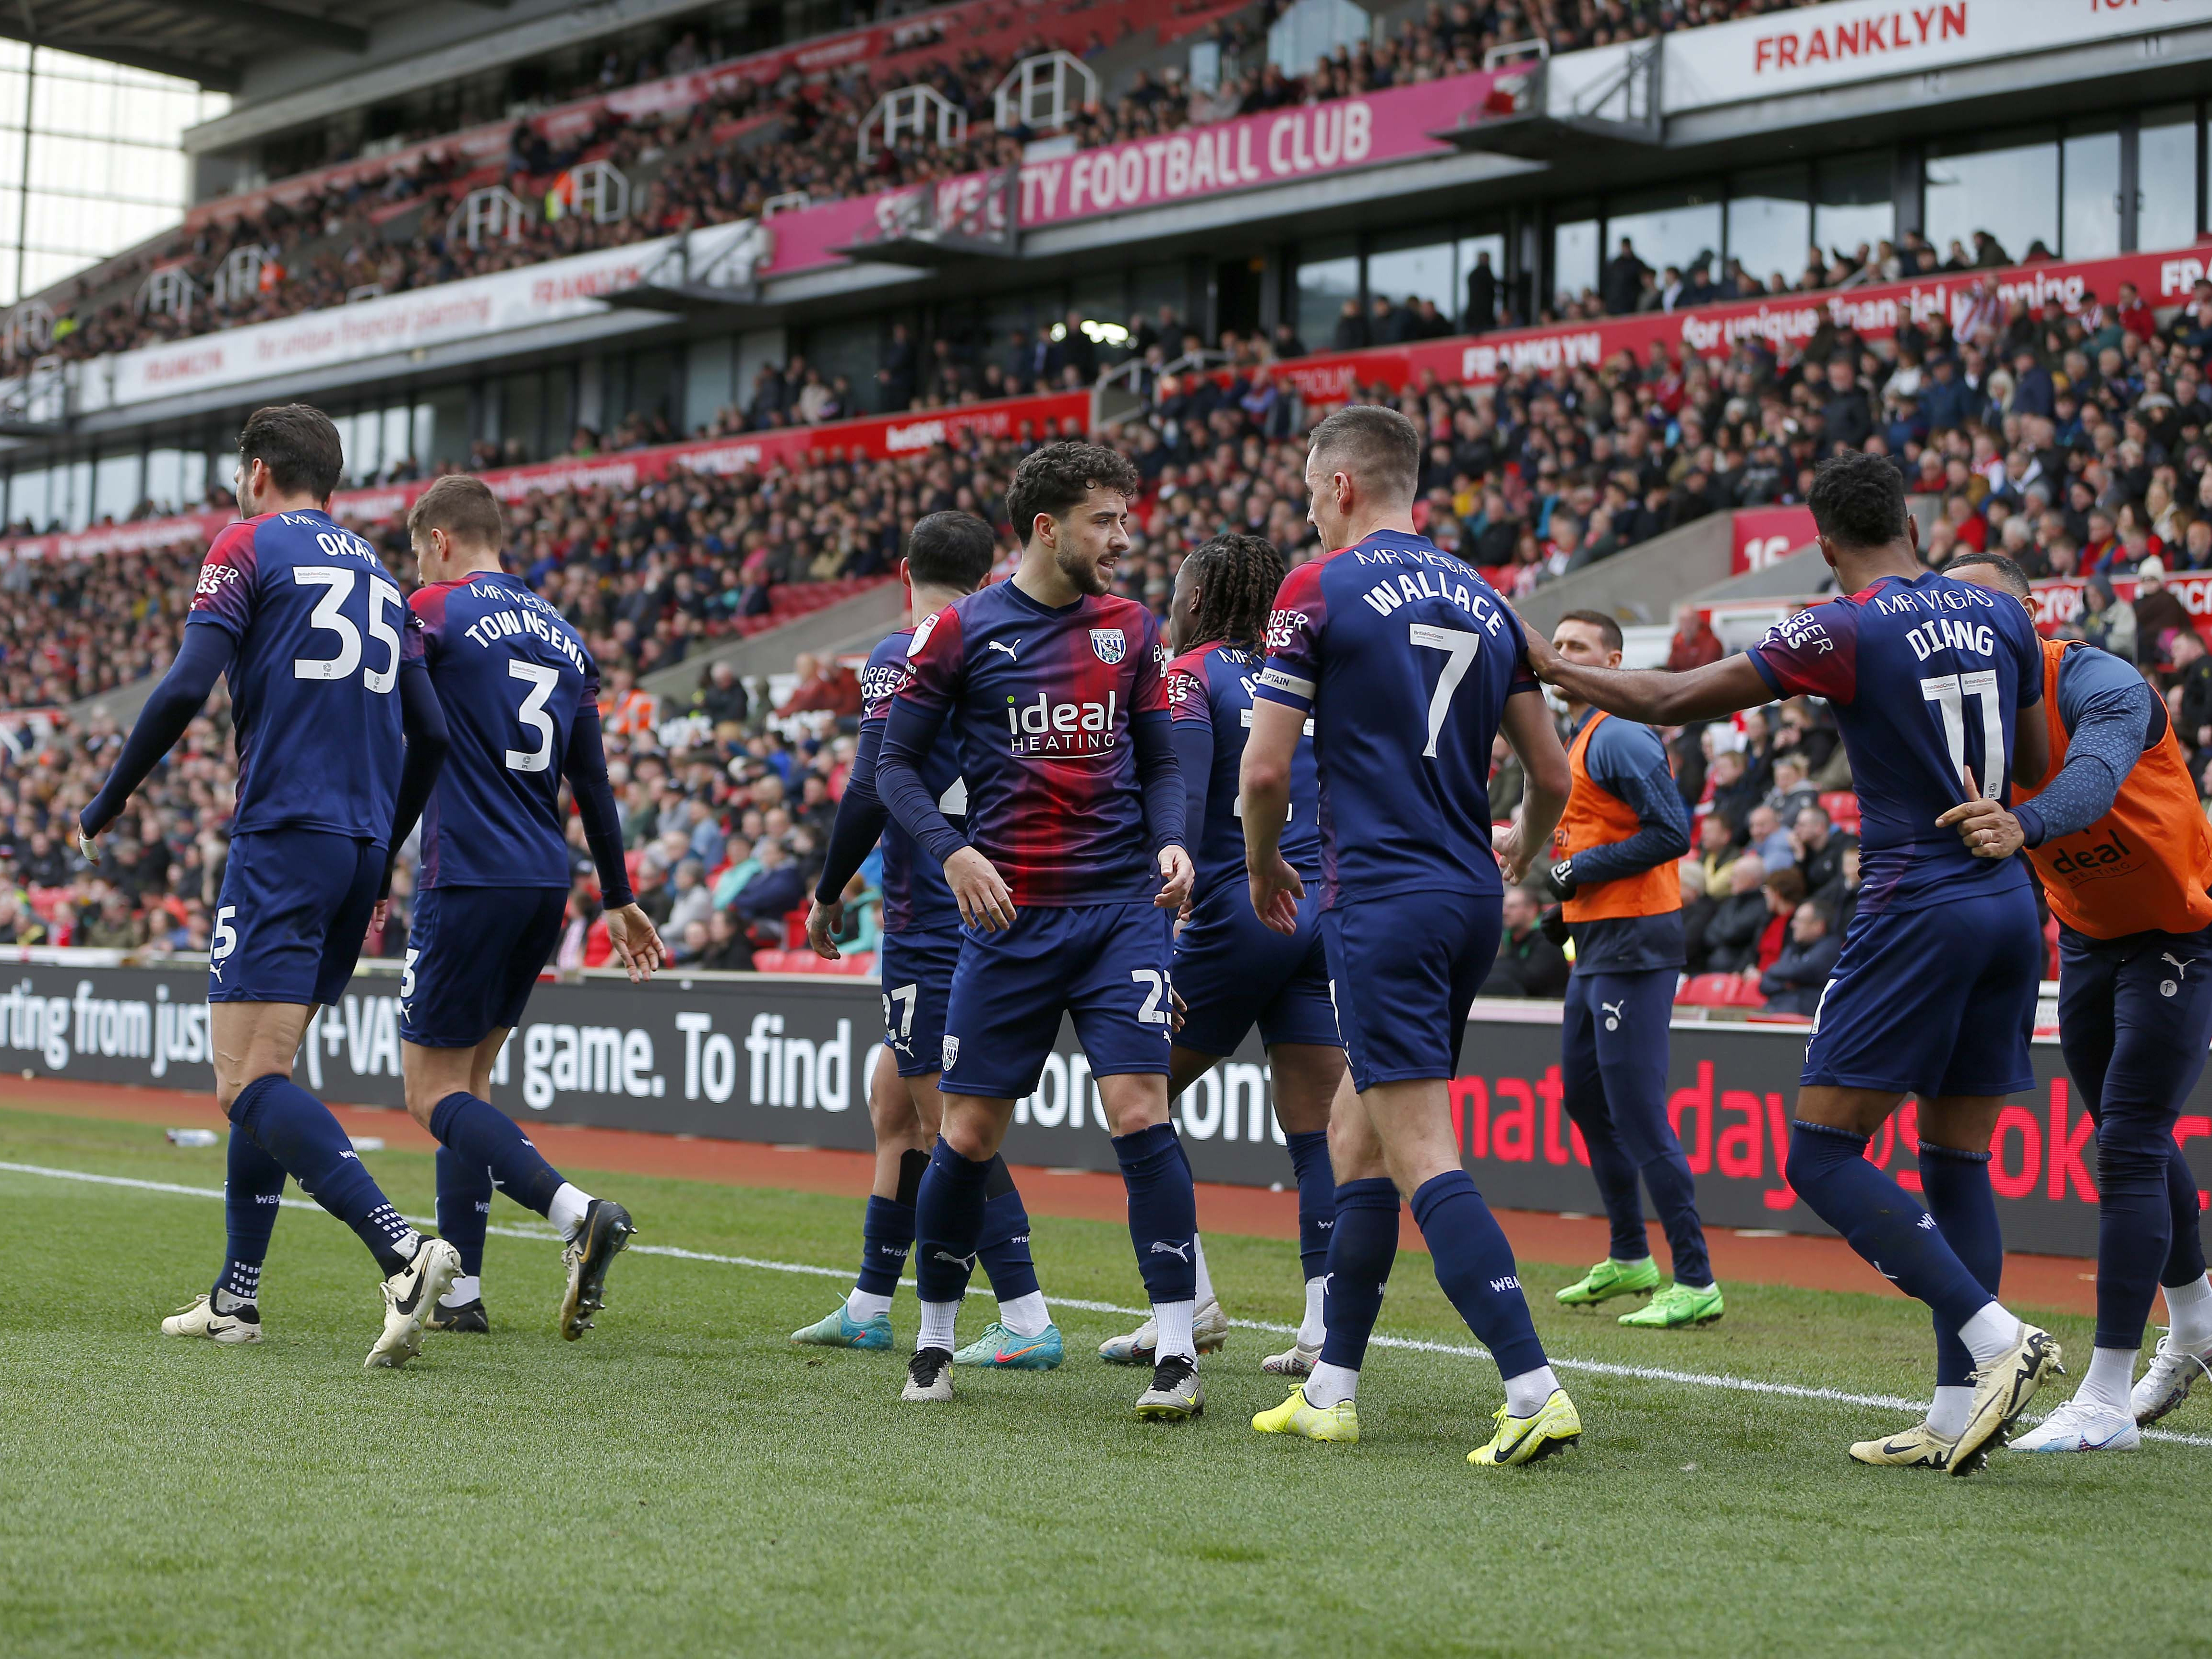 An image of Albion's squad celebrating a goal together at Stoke